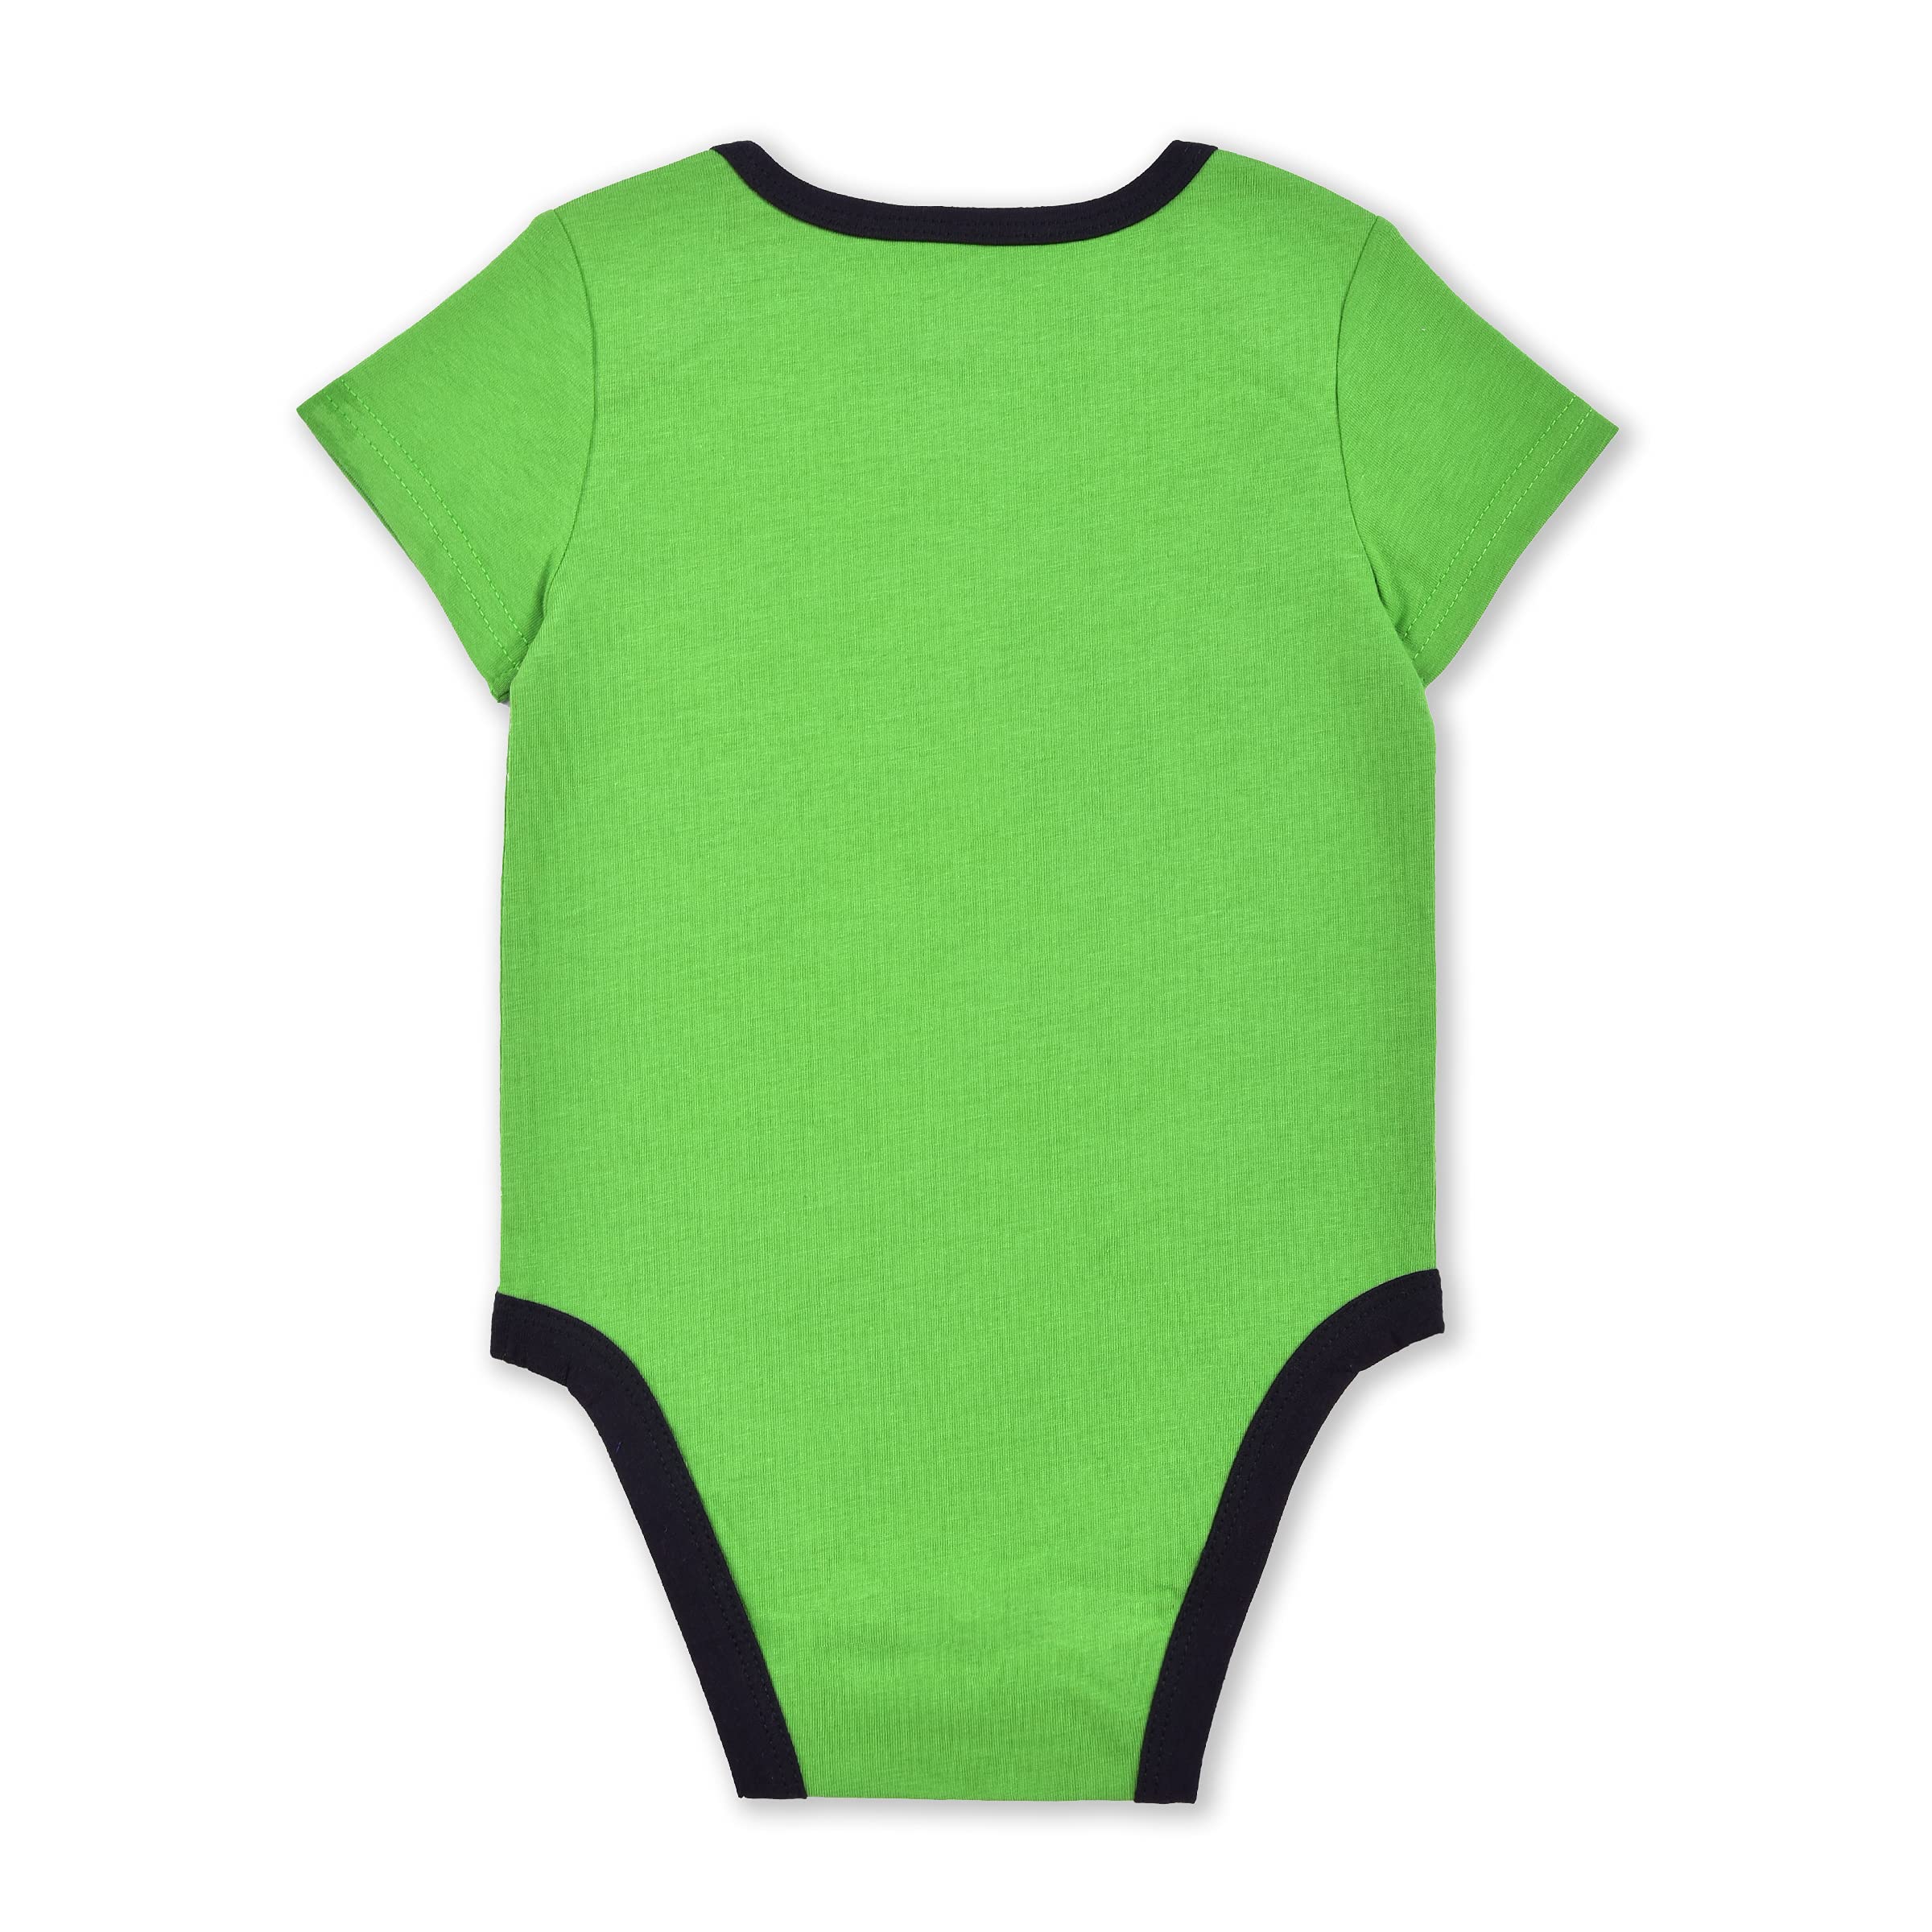 Disney Toy Story Boys Woody, Buzz Lightyear and Rex 3 Pack Bodysuit Creeper for Newborn and Infant – Yellow/Green/White